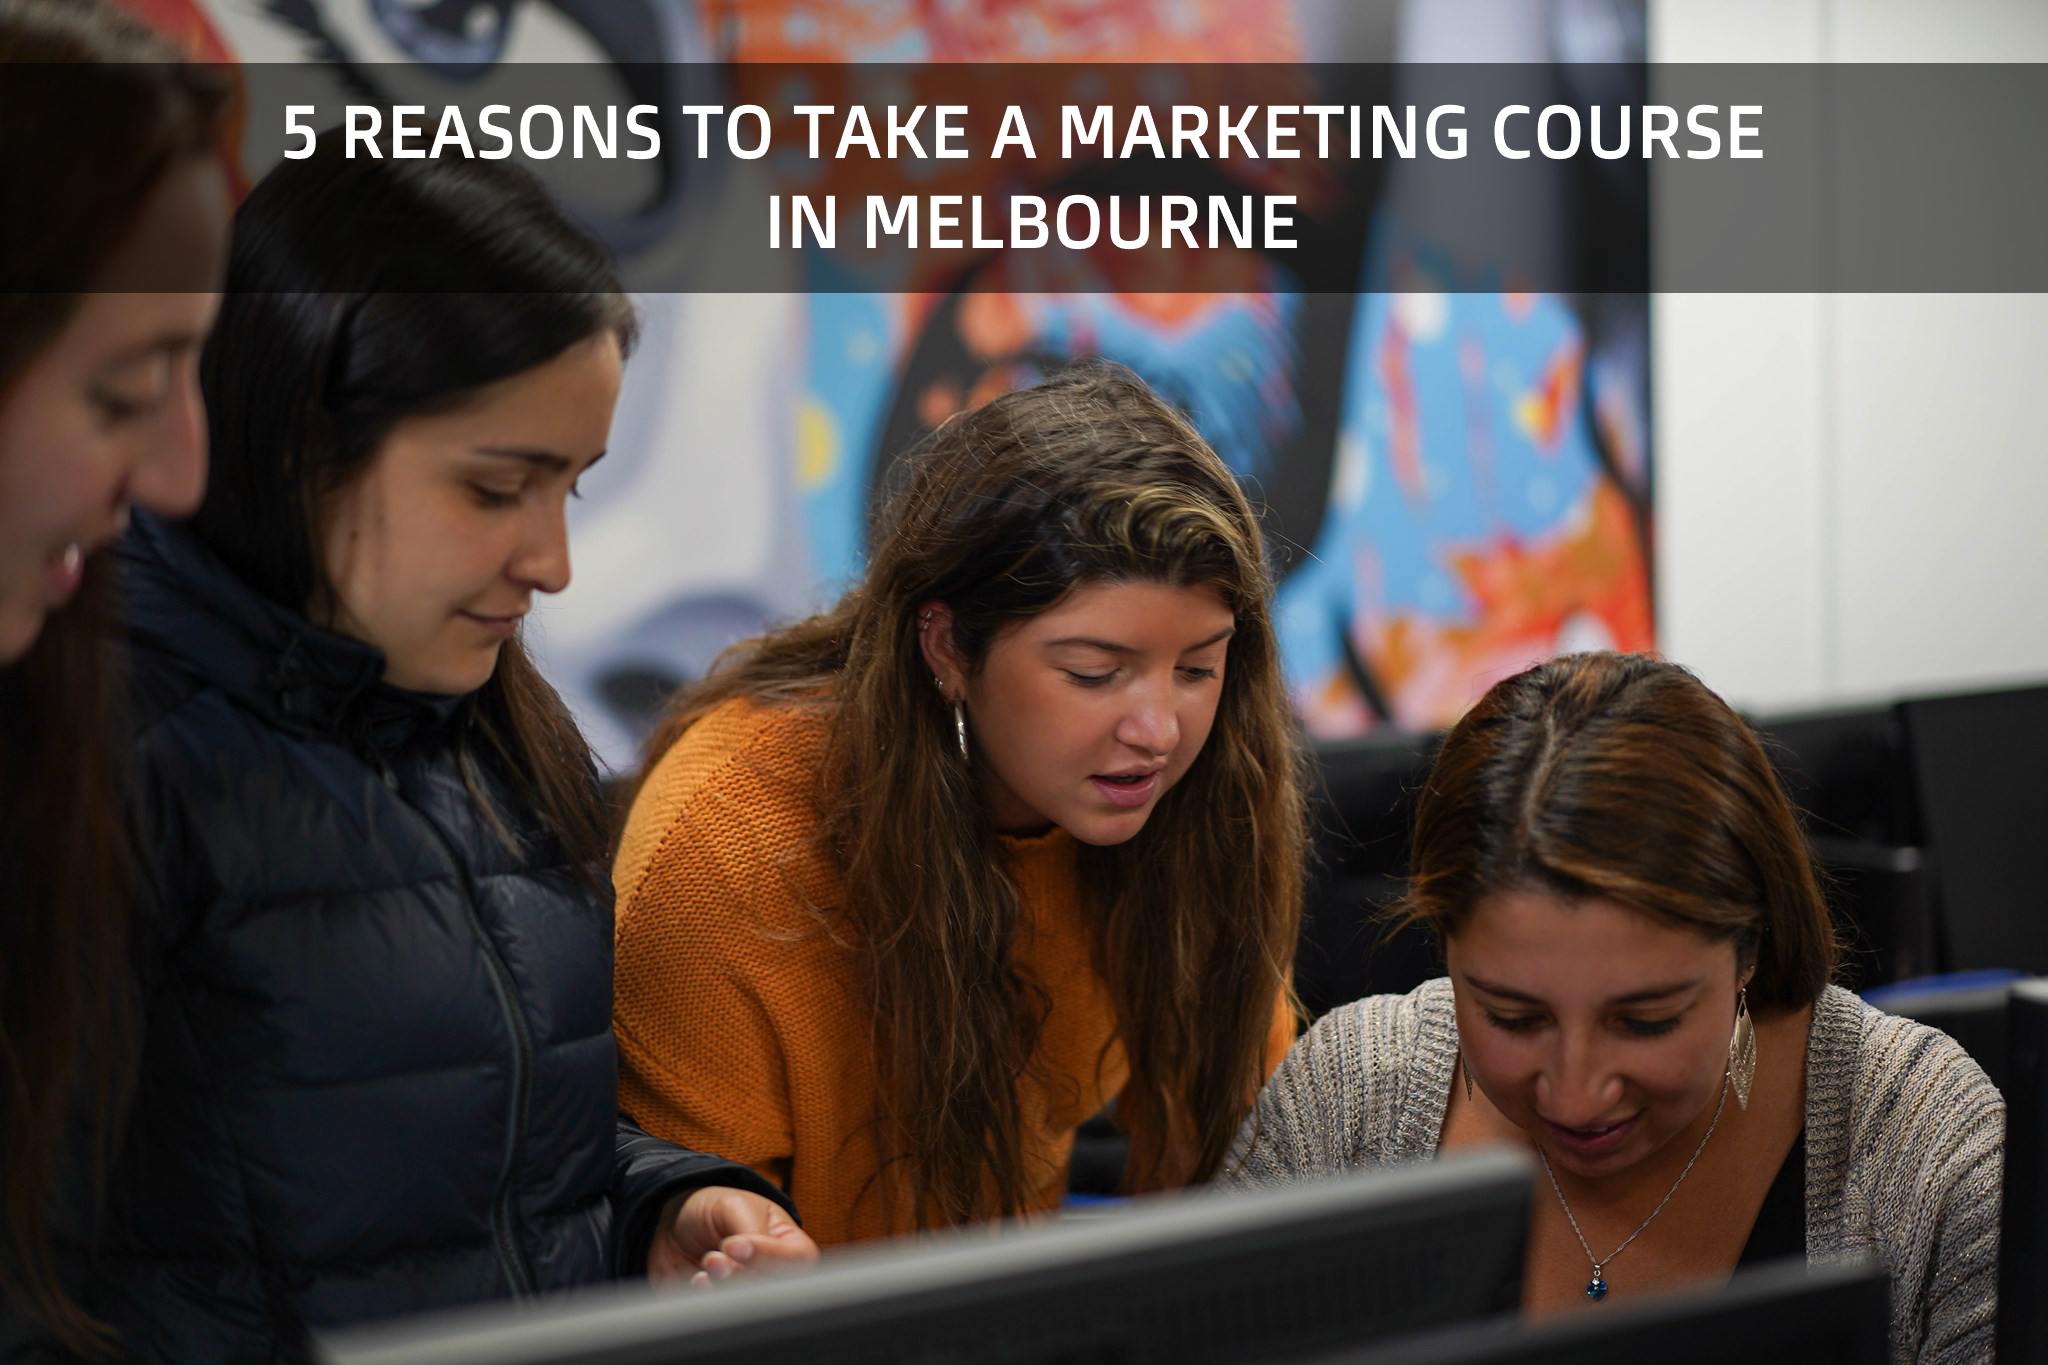 REASONS TO TAKE A MARKETING COURSE IN MELBOURNE